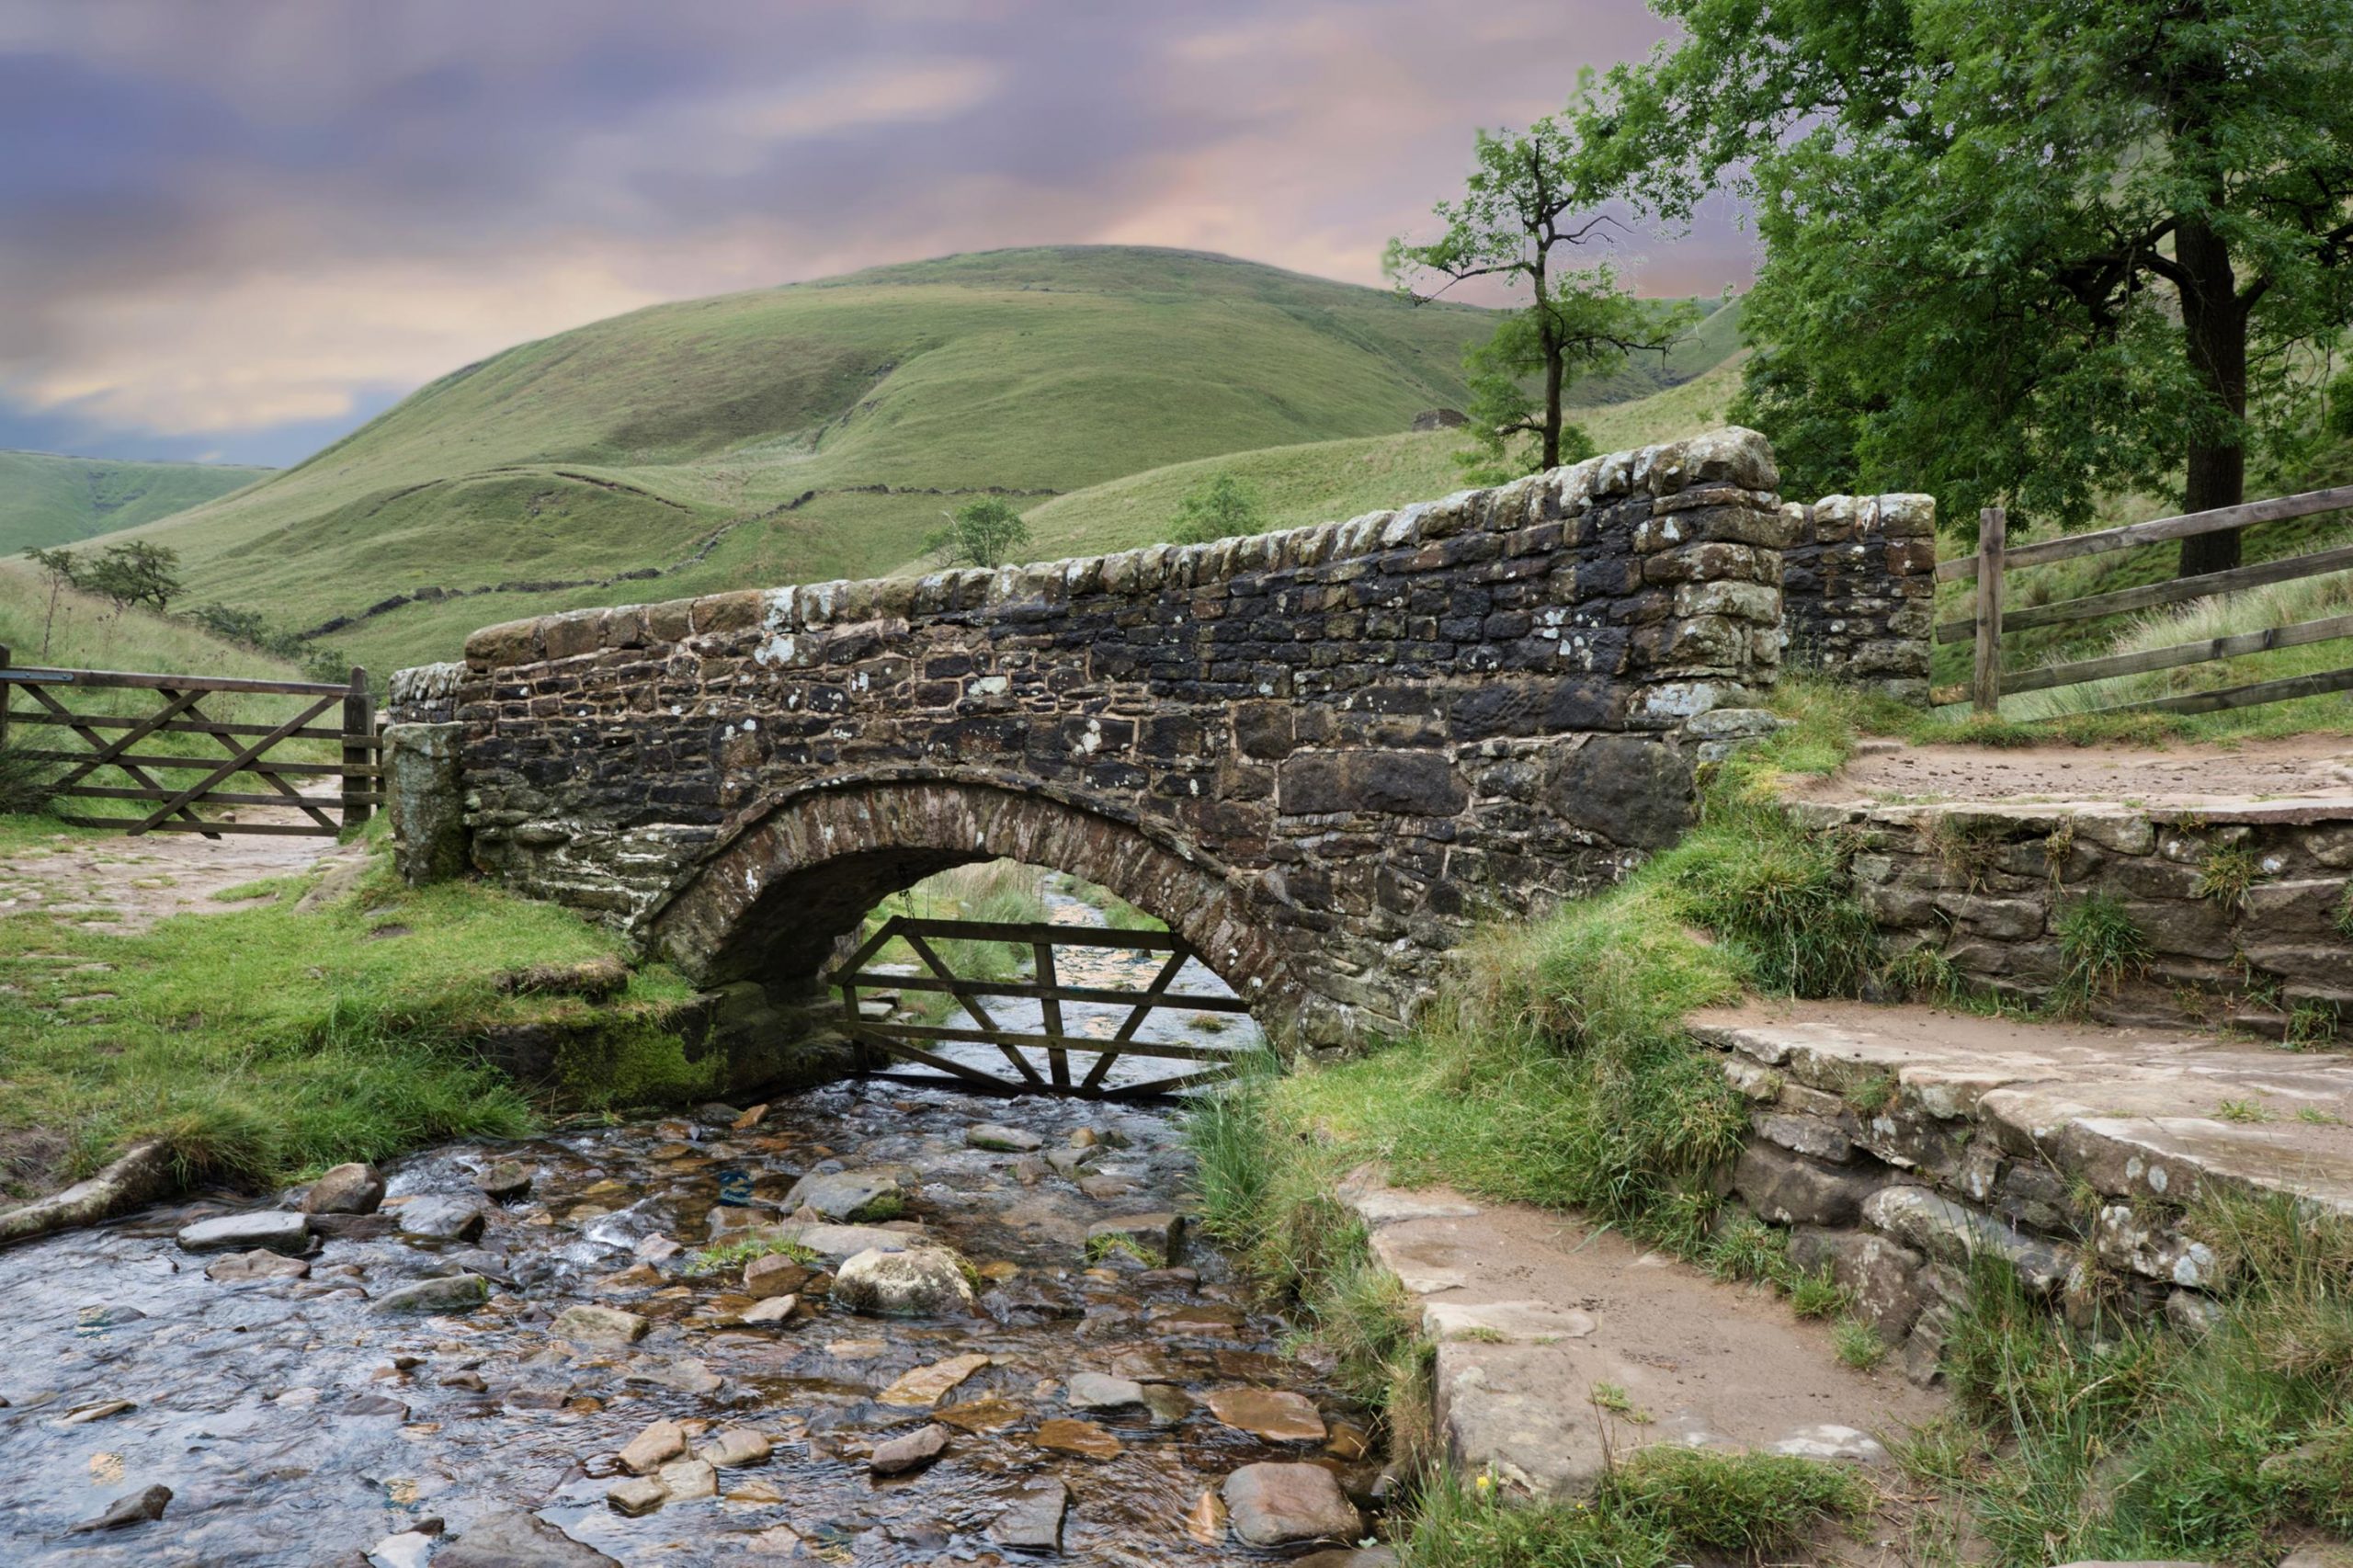 Visit Edale with Allied Taxis